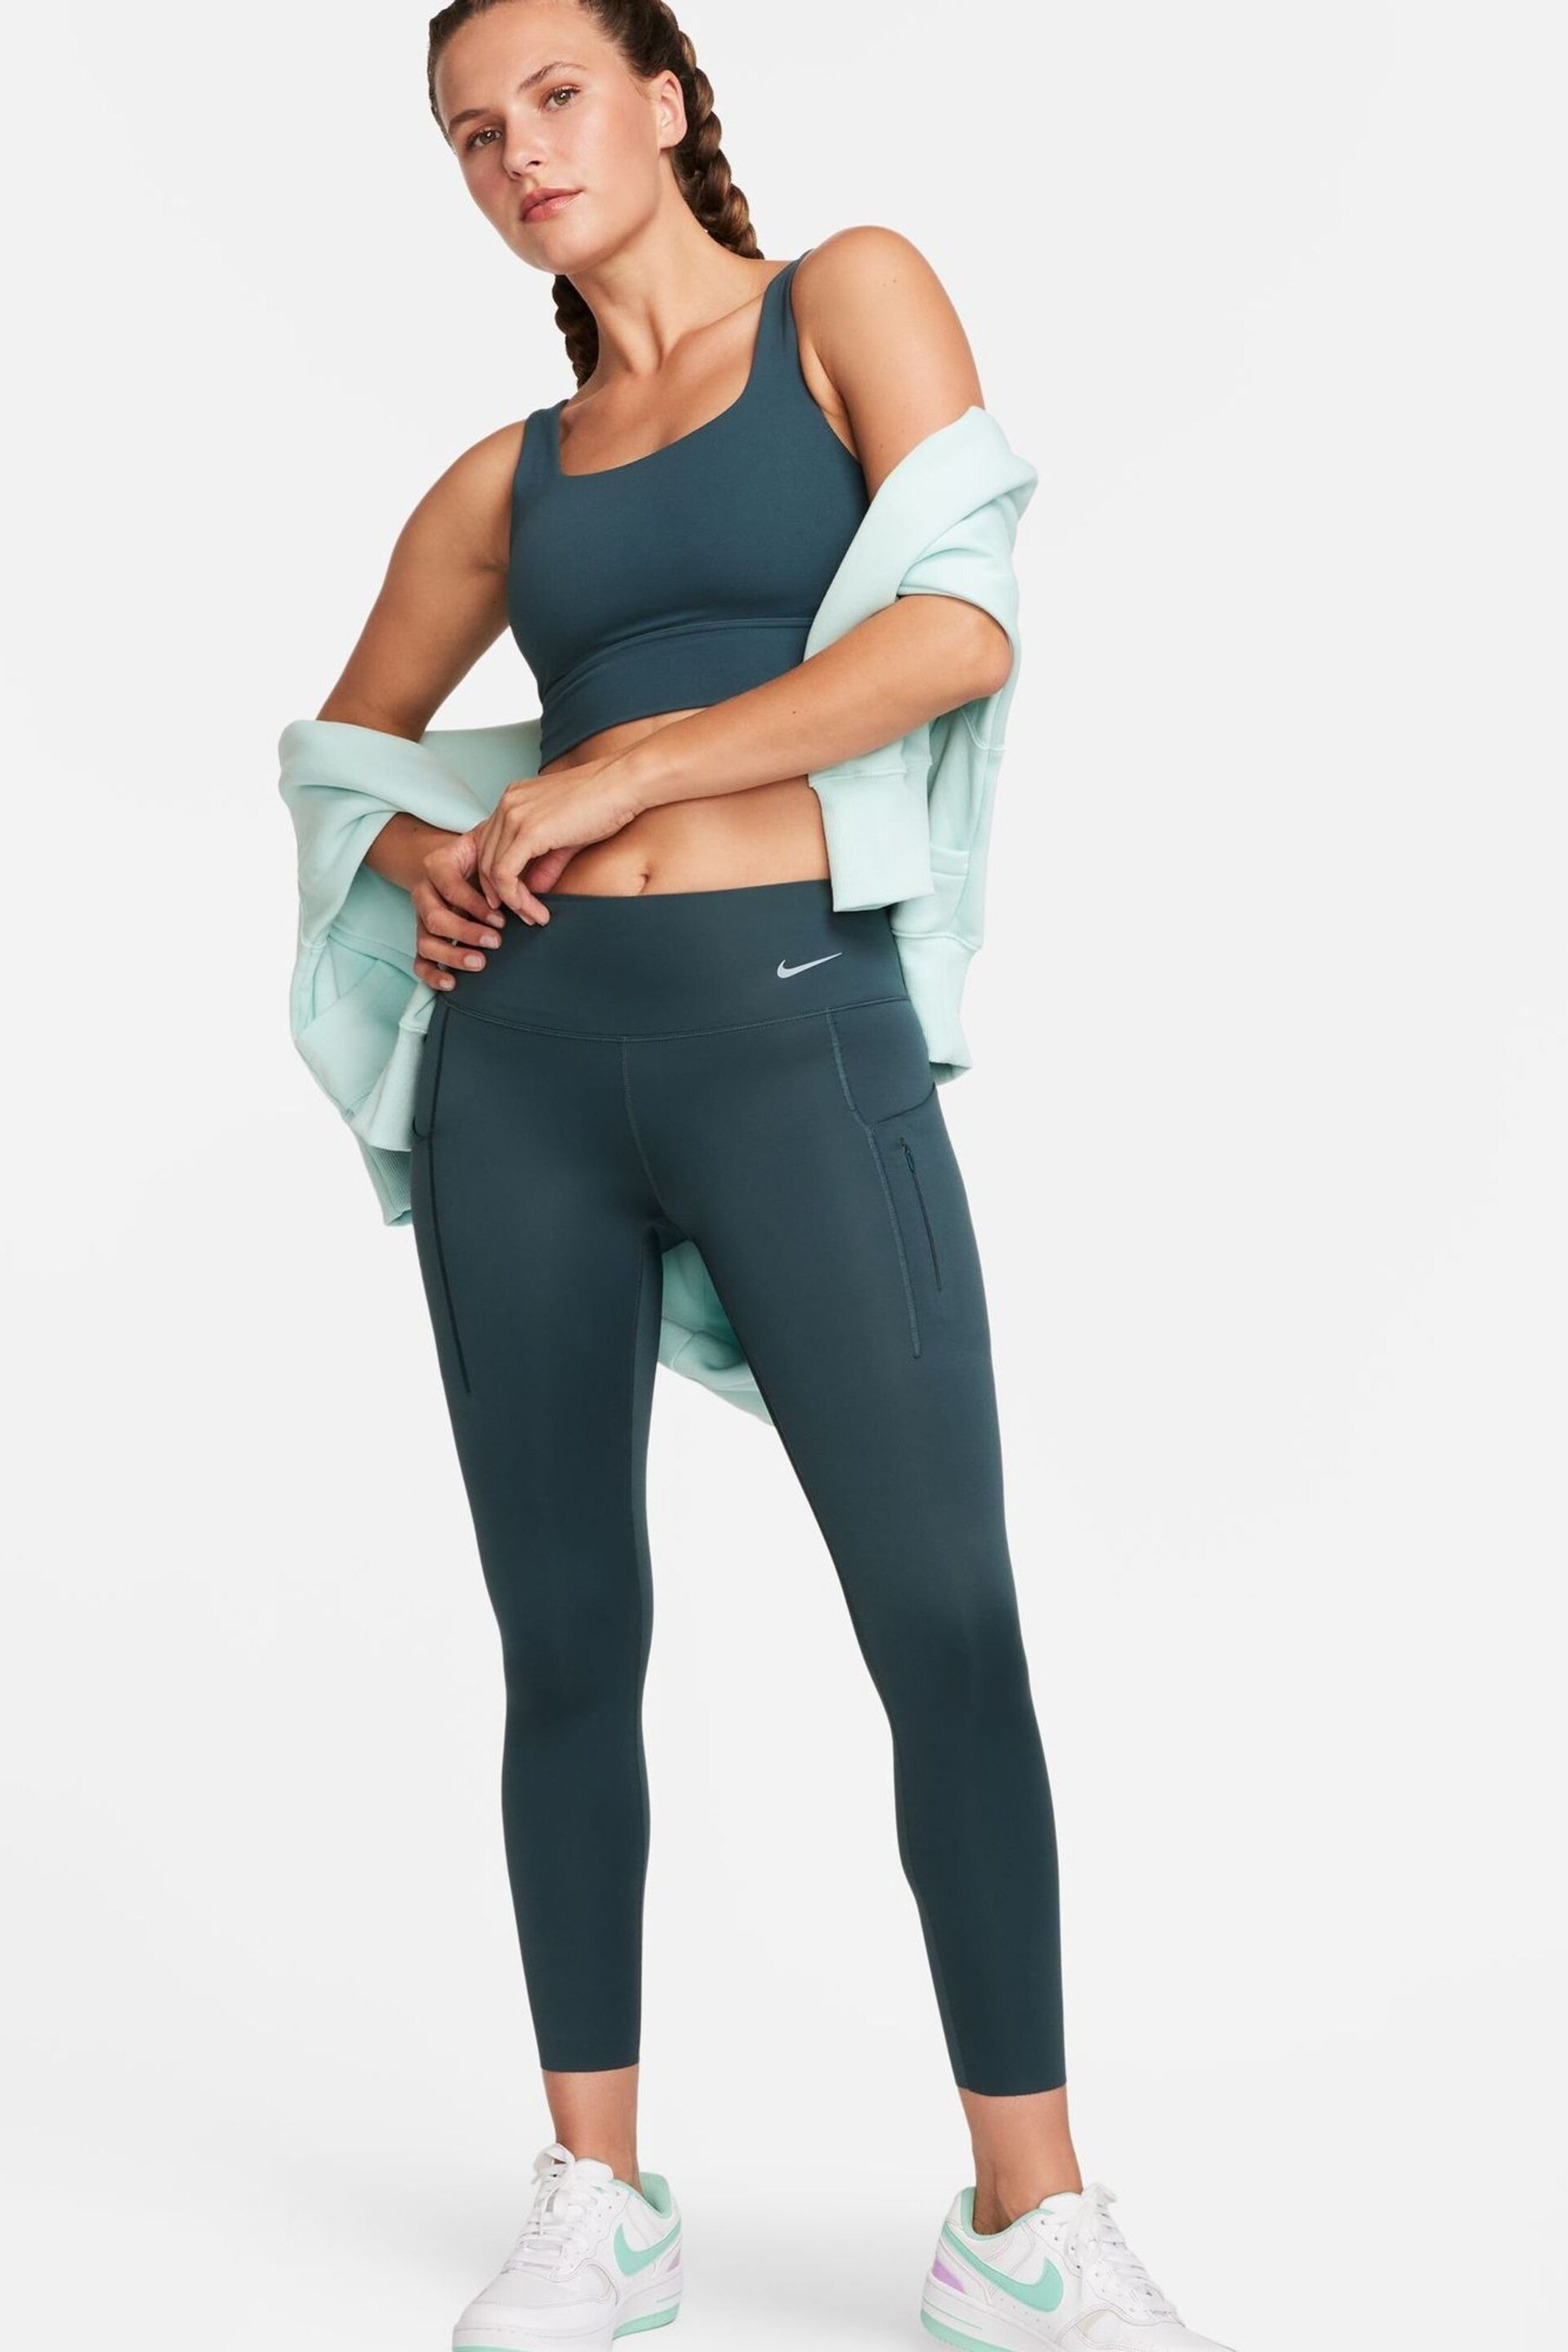 Nike Green Go Firm-Support Mid-Rise 7/8 Leggings with Pockets - Image 1 of 10